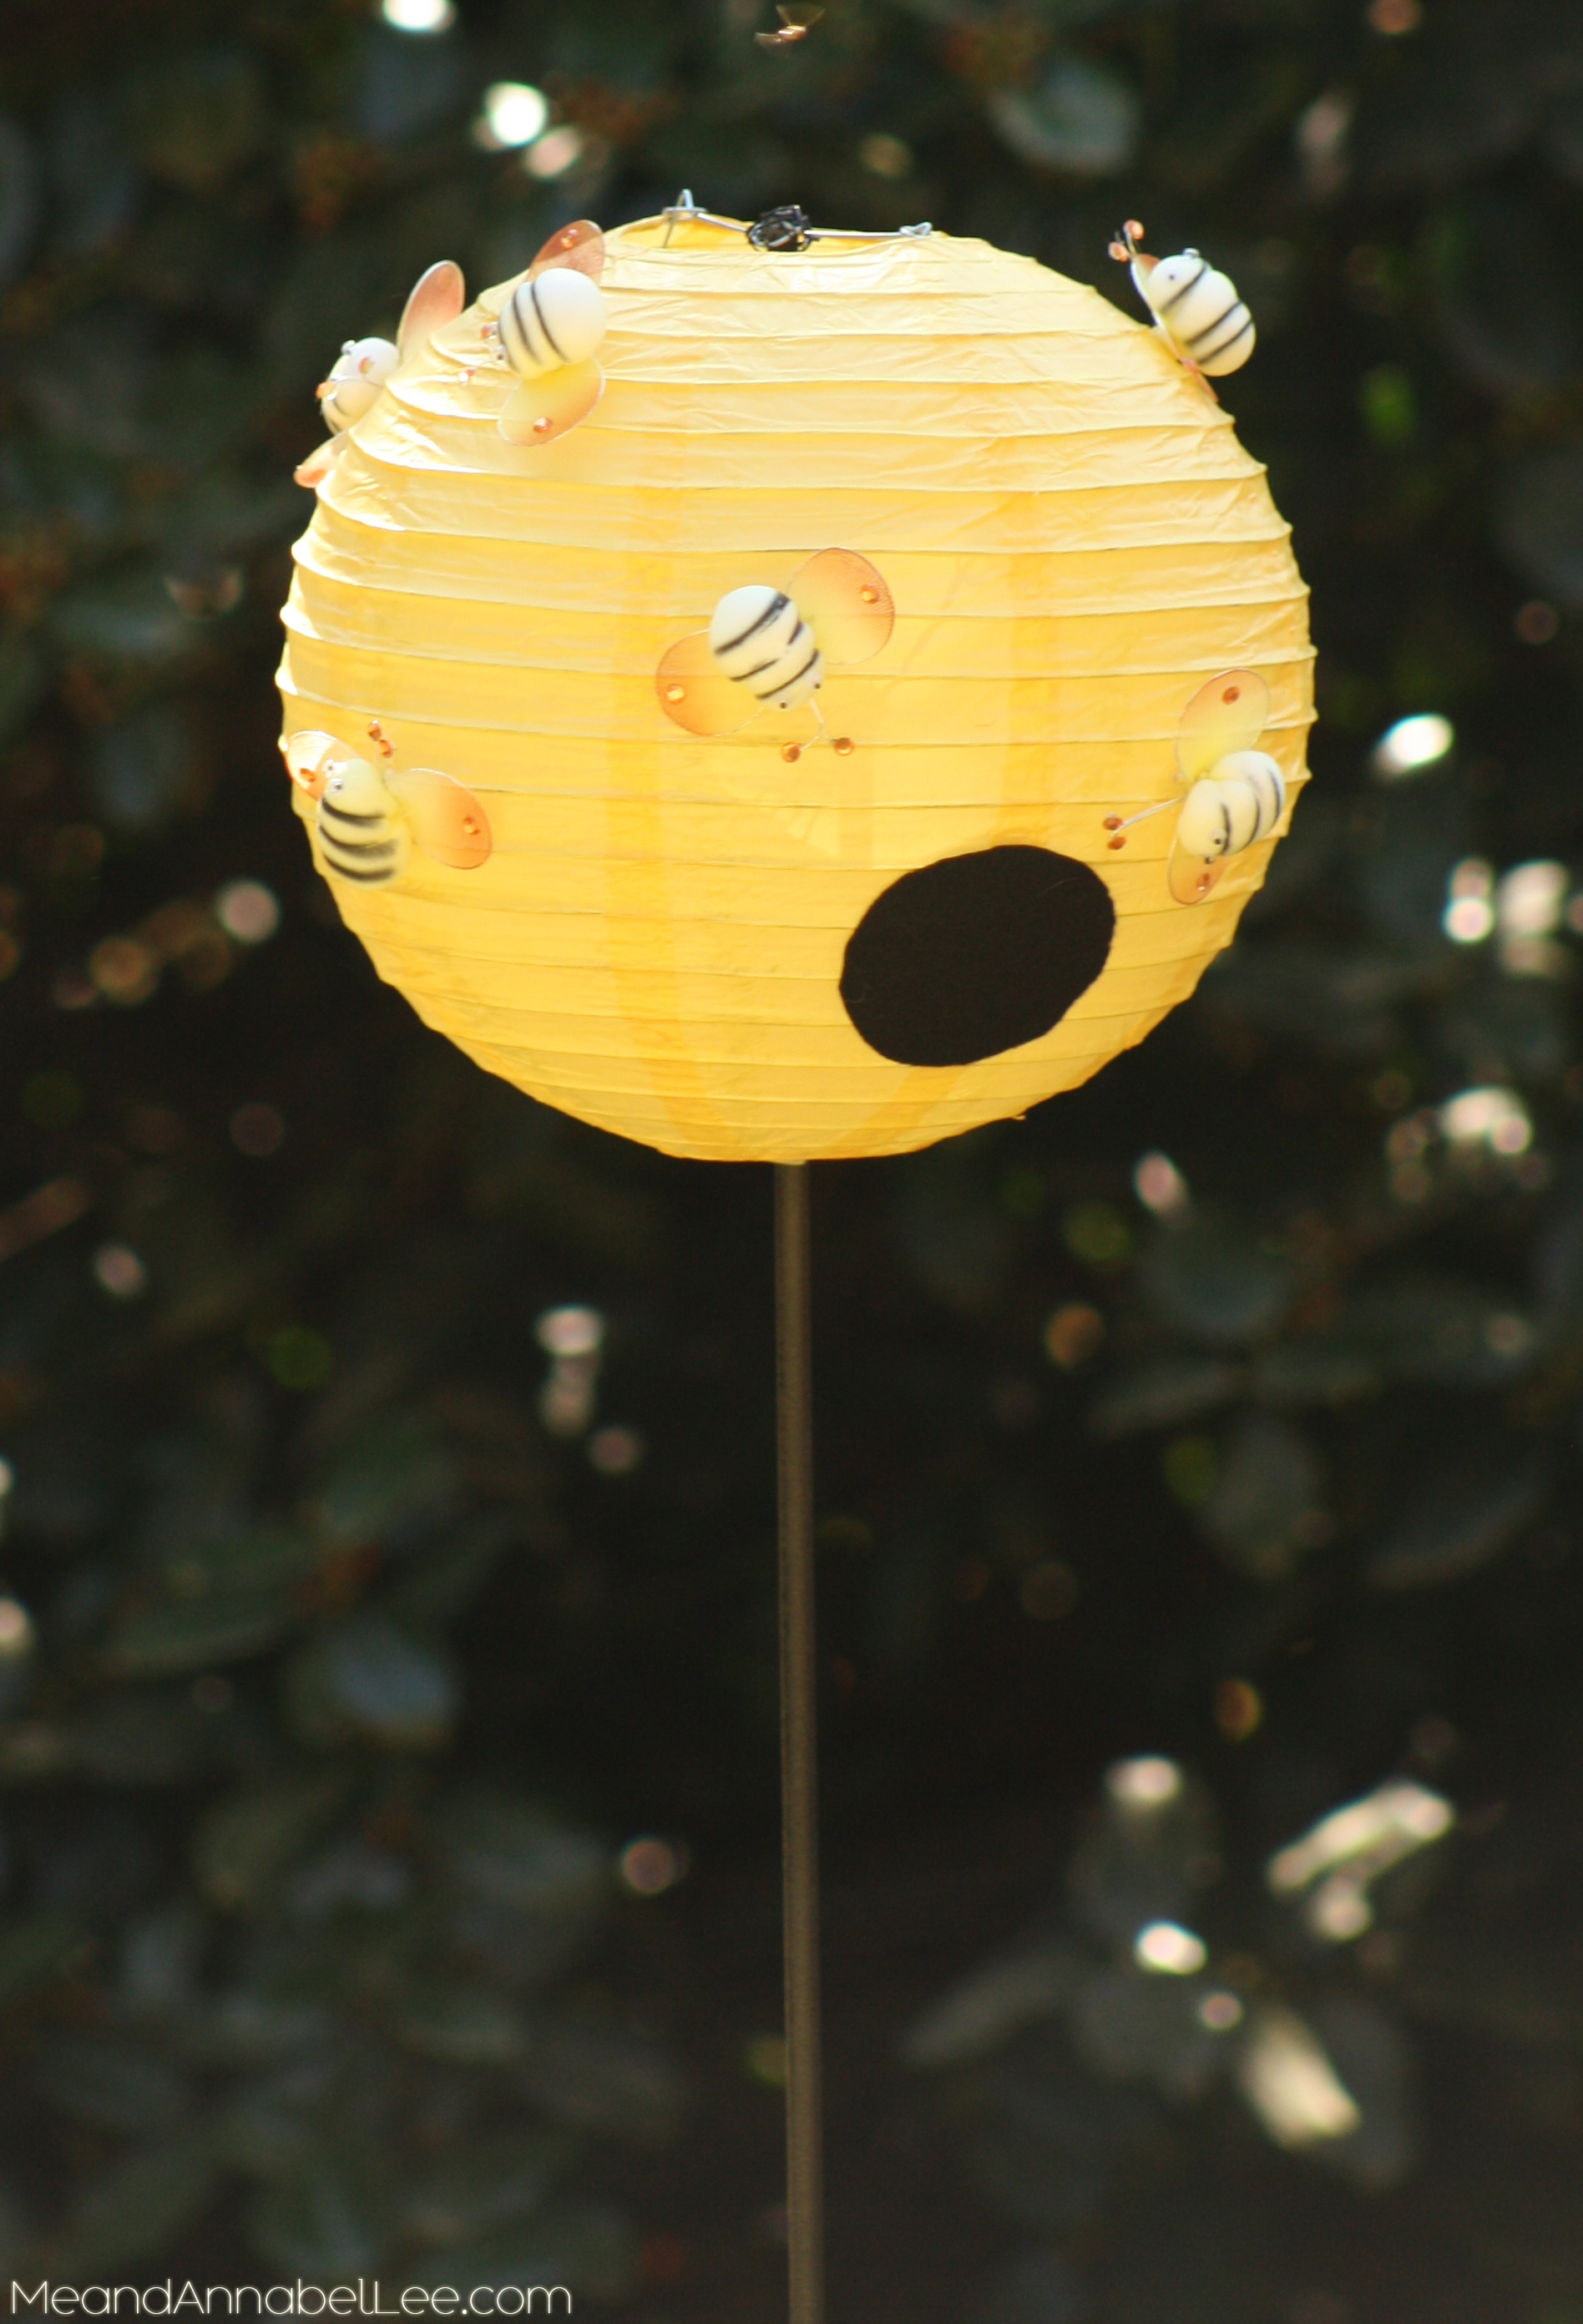 DIY Bumble Bee Costume - How to make a Beehive- www.MeandAnnabelLee.com